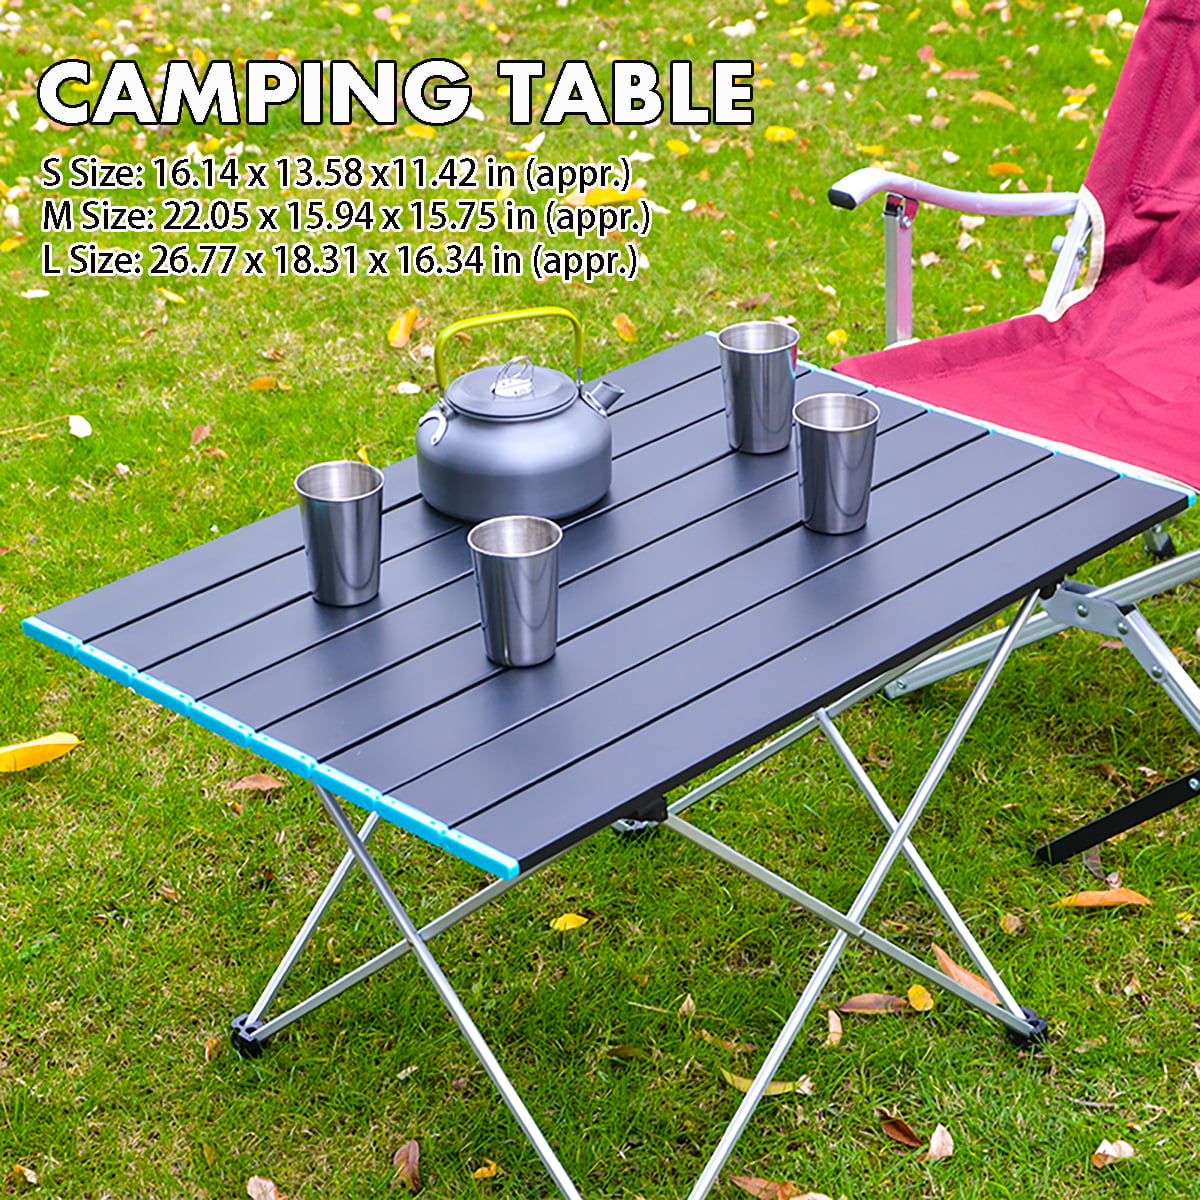 Various Sizes Camping Table Easy Carry Picnic Folding Table Roll-up Heat Resisting Top with Storage Bag Heavy Duty Outdoor RV BBQ Cooking Black